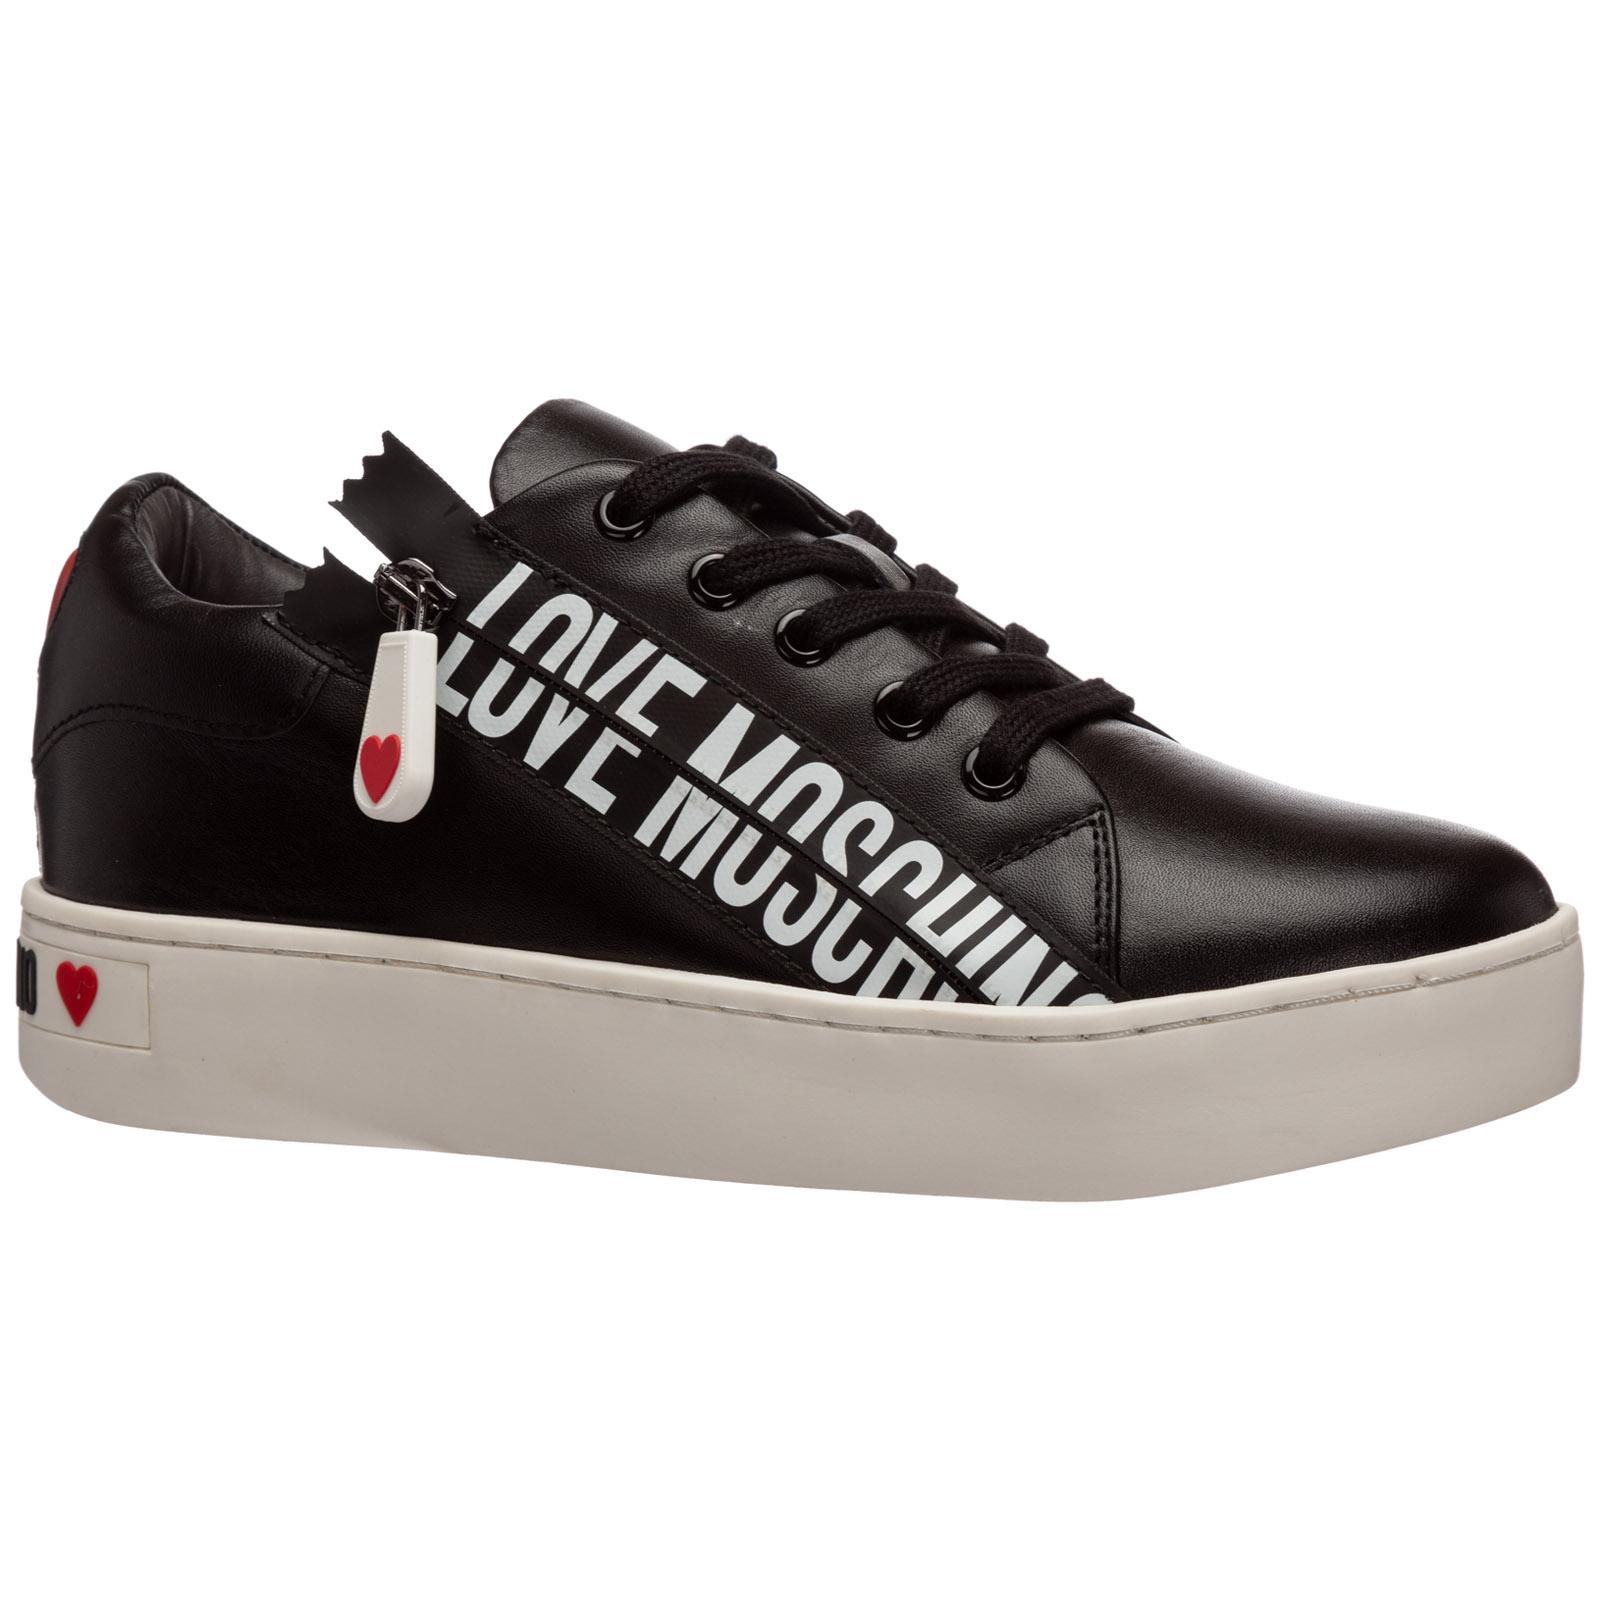 Love Moschino Leather Shoes Trainers Sneakers in Nero (Black) - Lyst